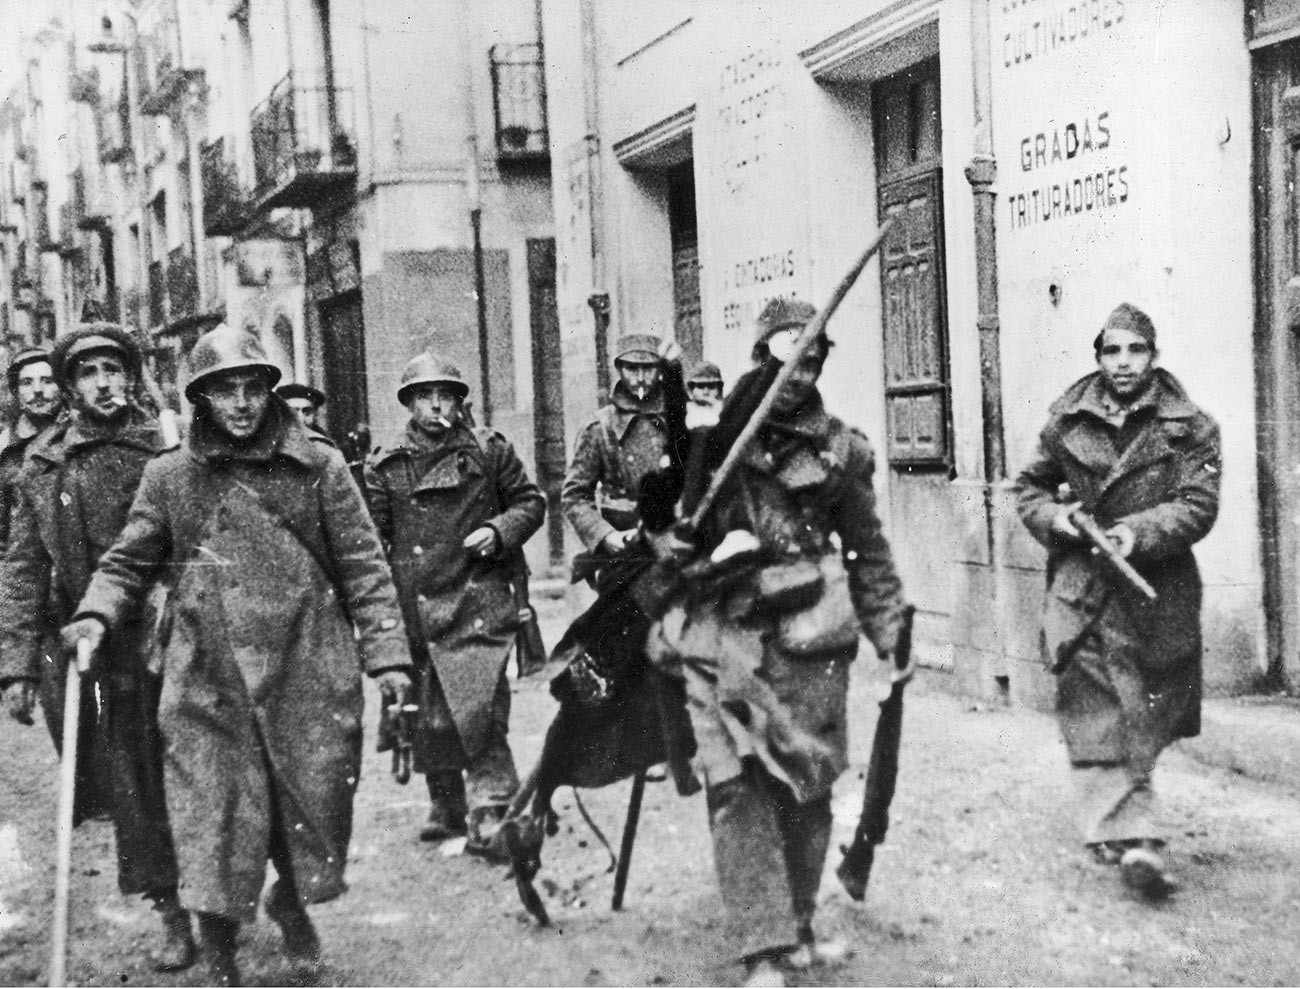 The Spanish republican soldiers during the Civil War in Spain